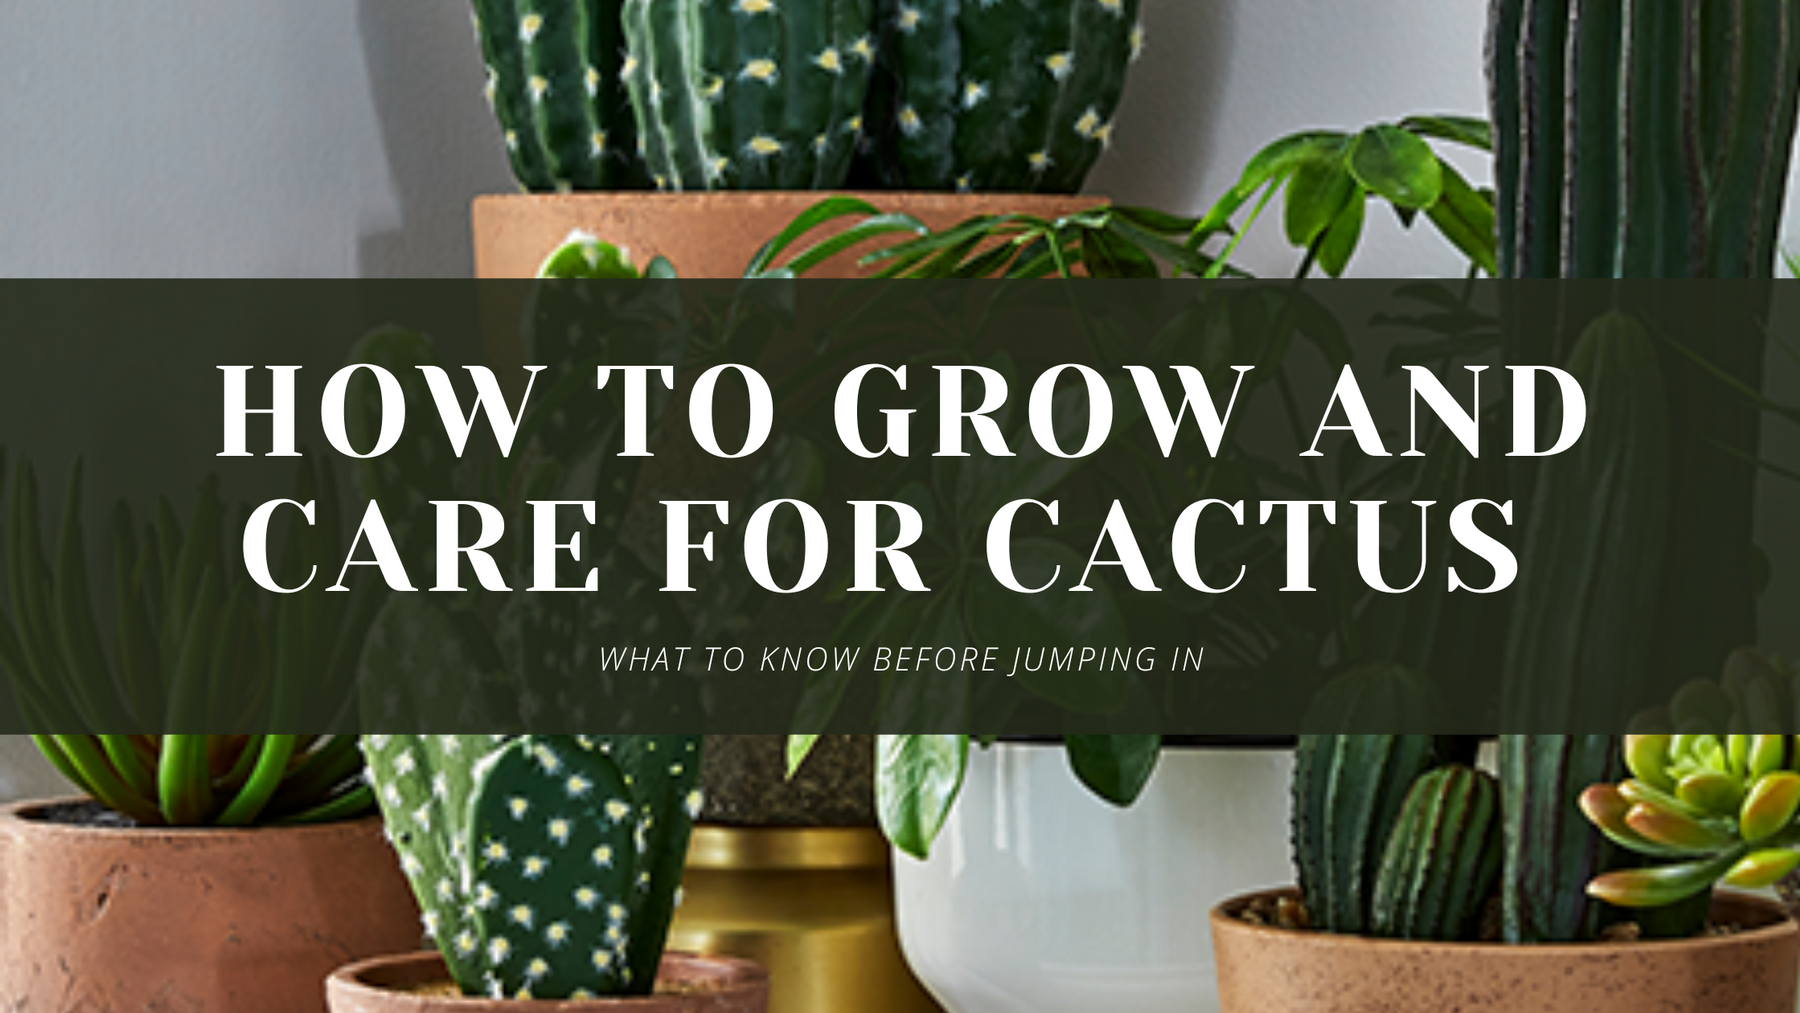 How To Grow And Care For Cactus Plants